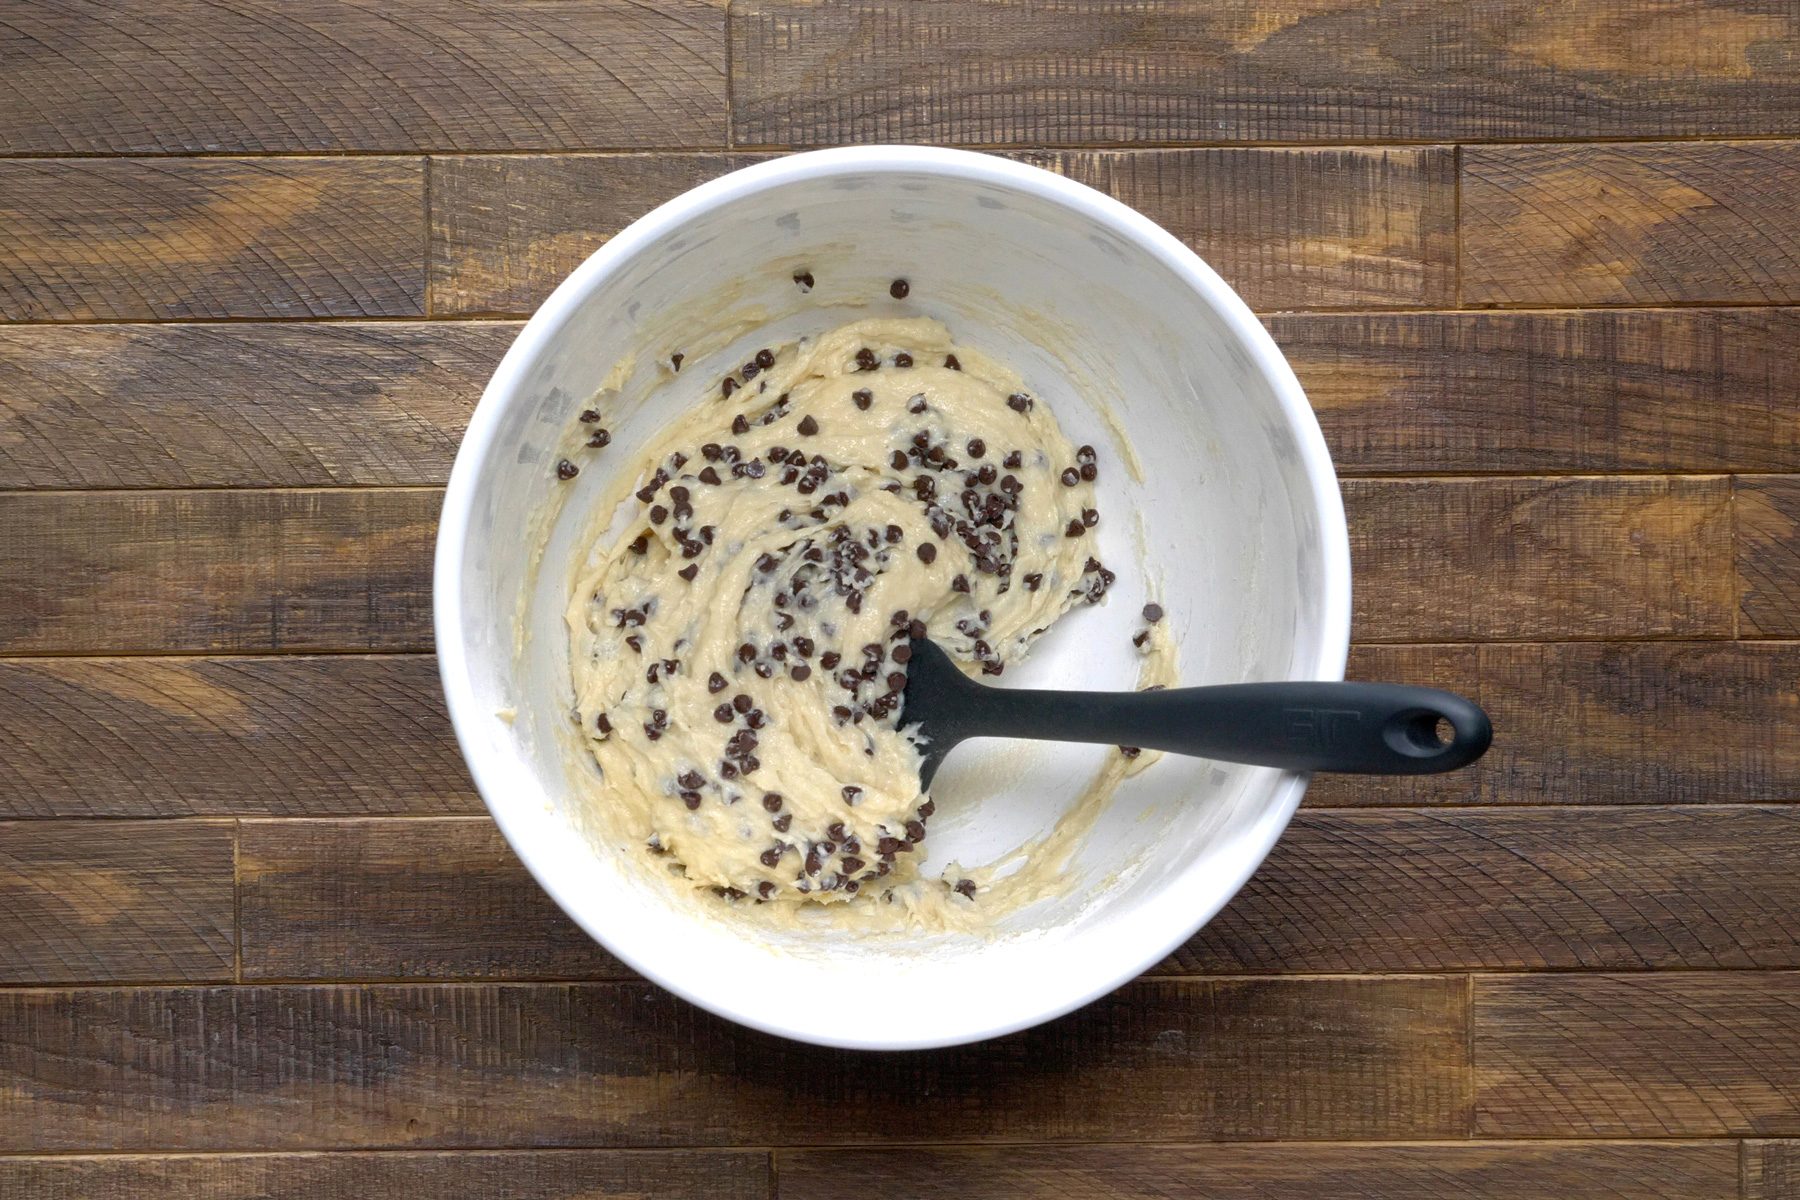 A white bowl of a batter with chocolate chips.